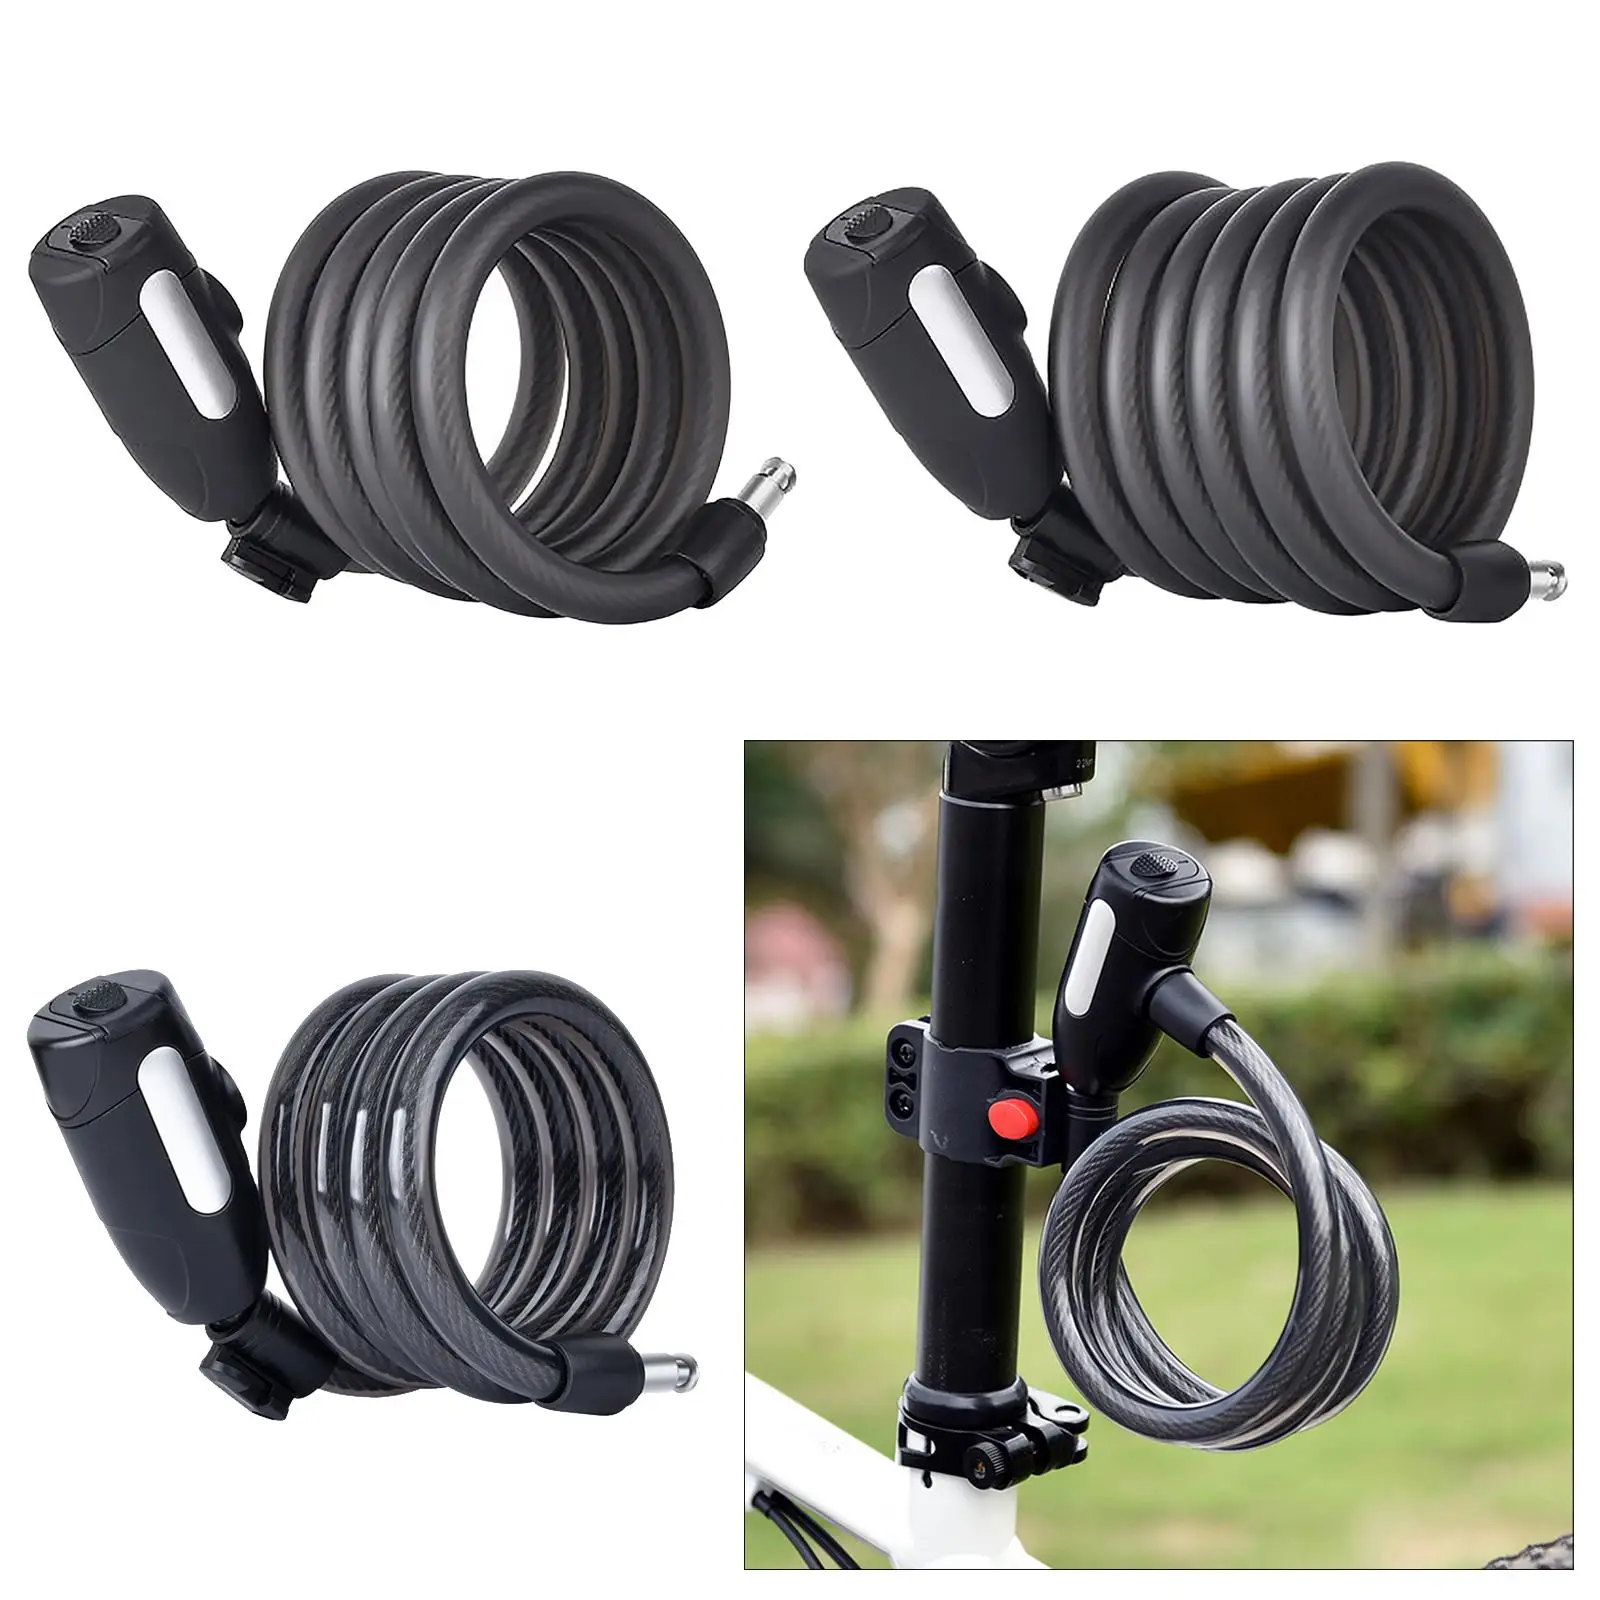 Bike Lock Anti Theft Security Bicycle Accessories Cable Lock MTB Road Bike Motorcycle Cycling Steel Safety Lock